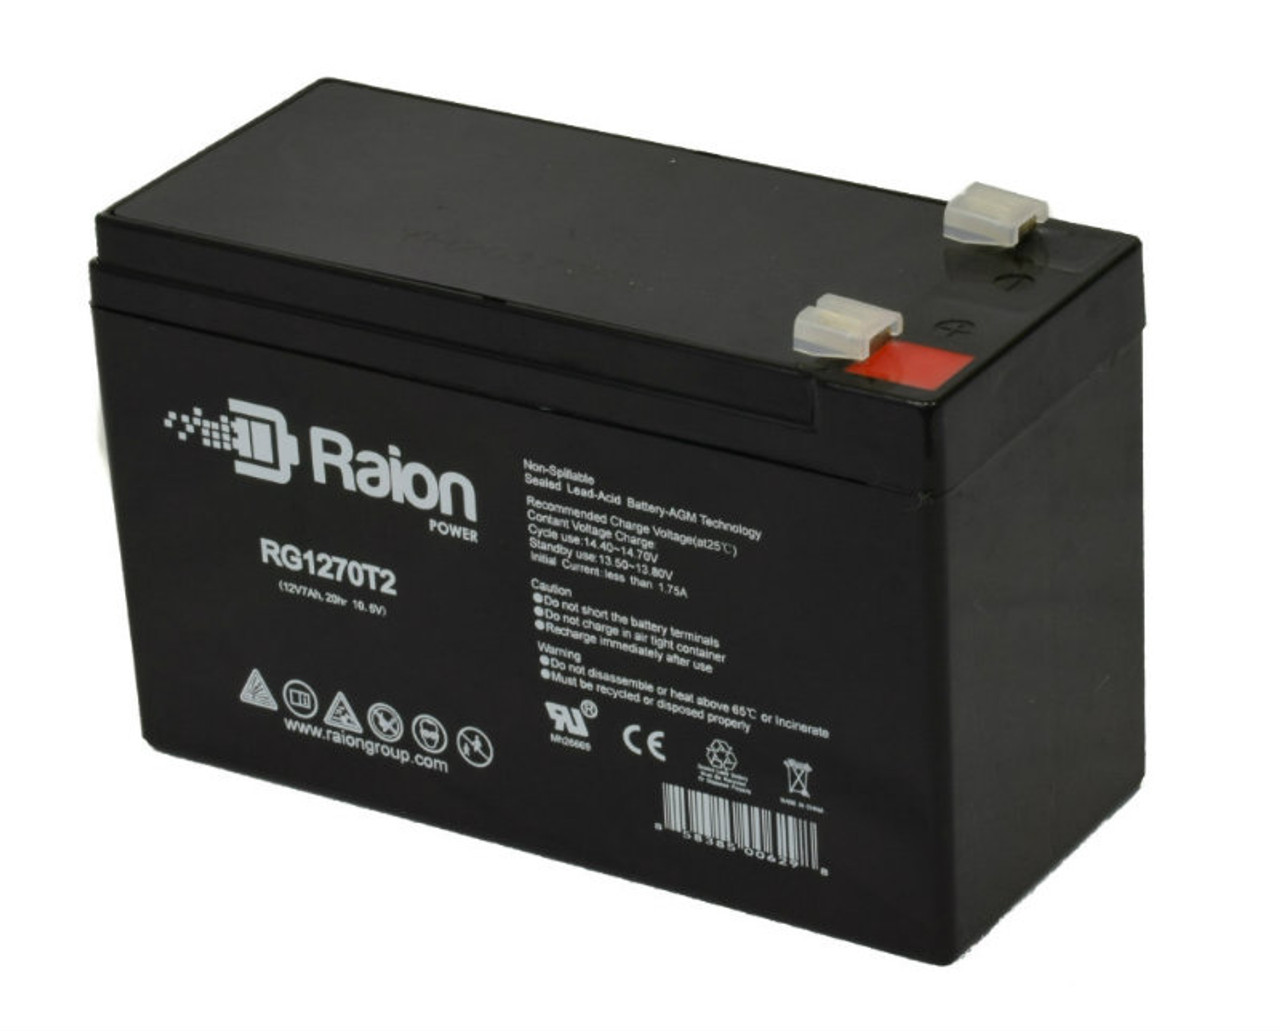 Raion Power RG1270T1 12V 7Ah Non-Spillable Replacement Battery for Liven LV7.2-12 F1